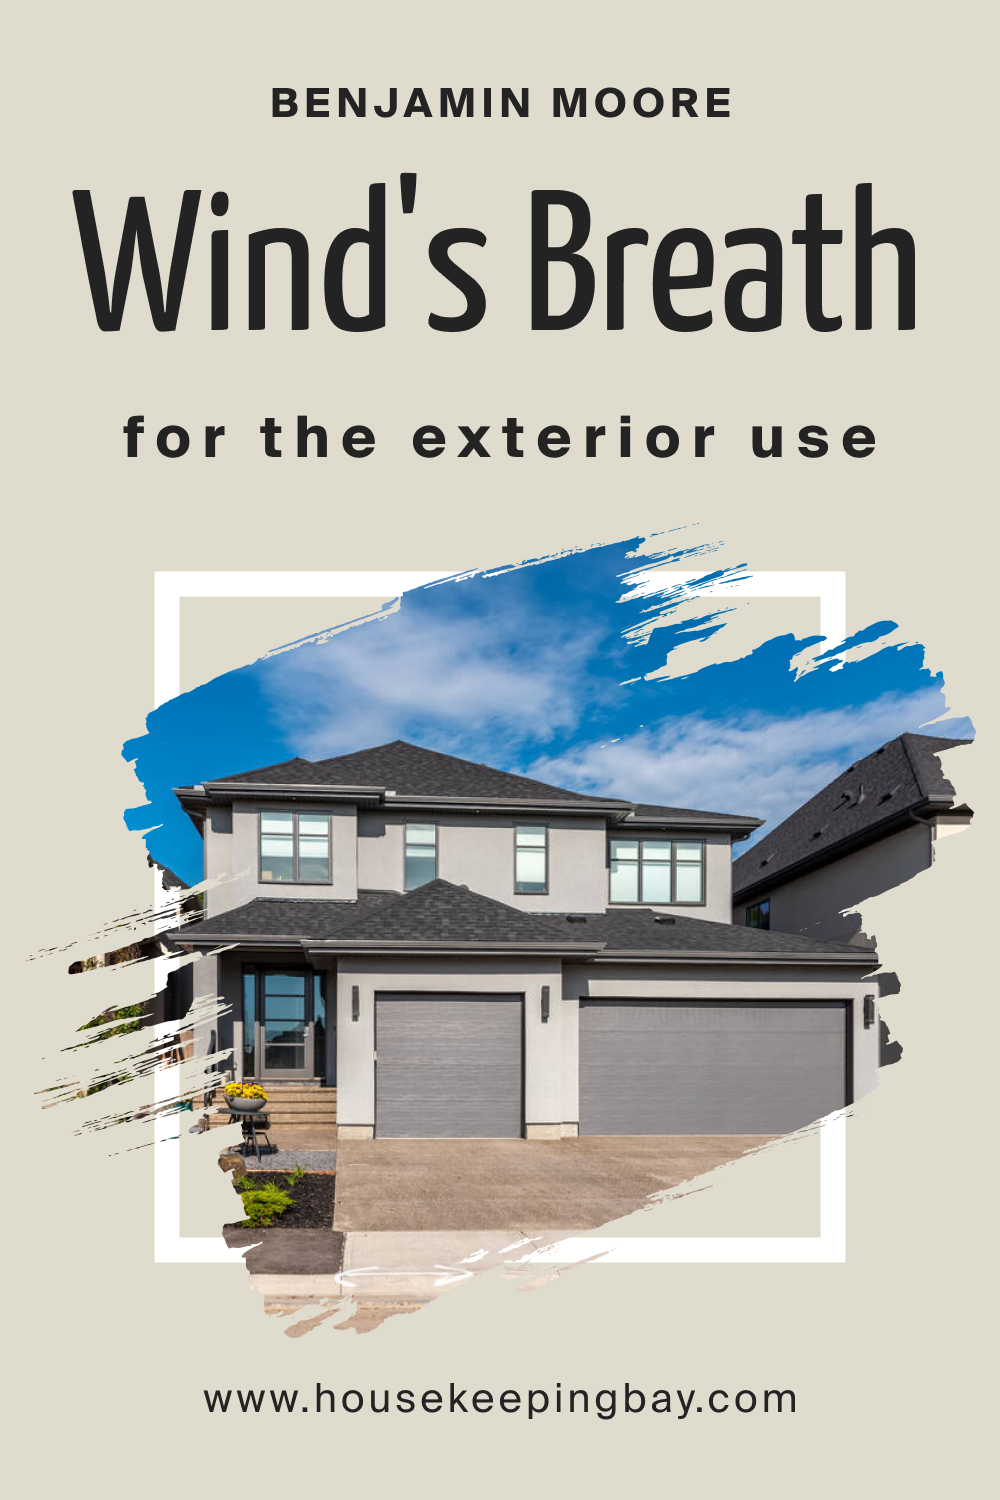 How to Use BM Wind's Breath 981 for an Exterior?